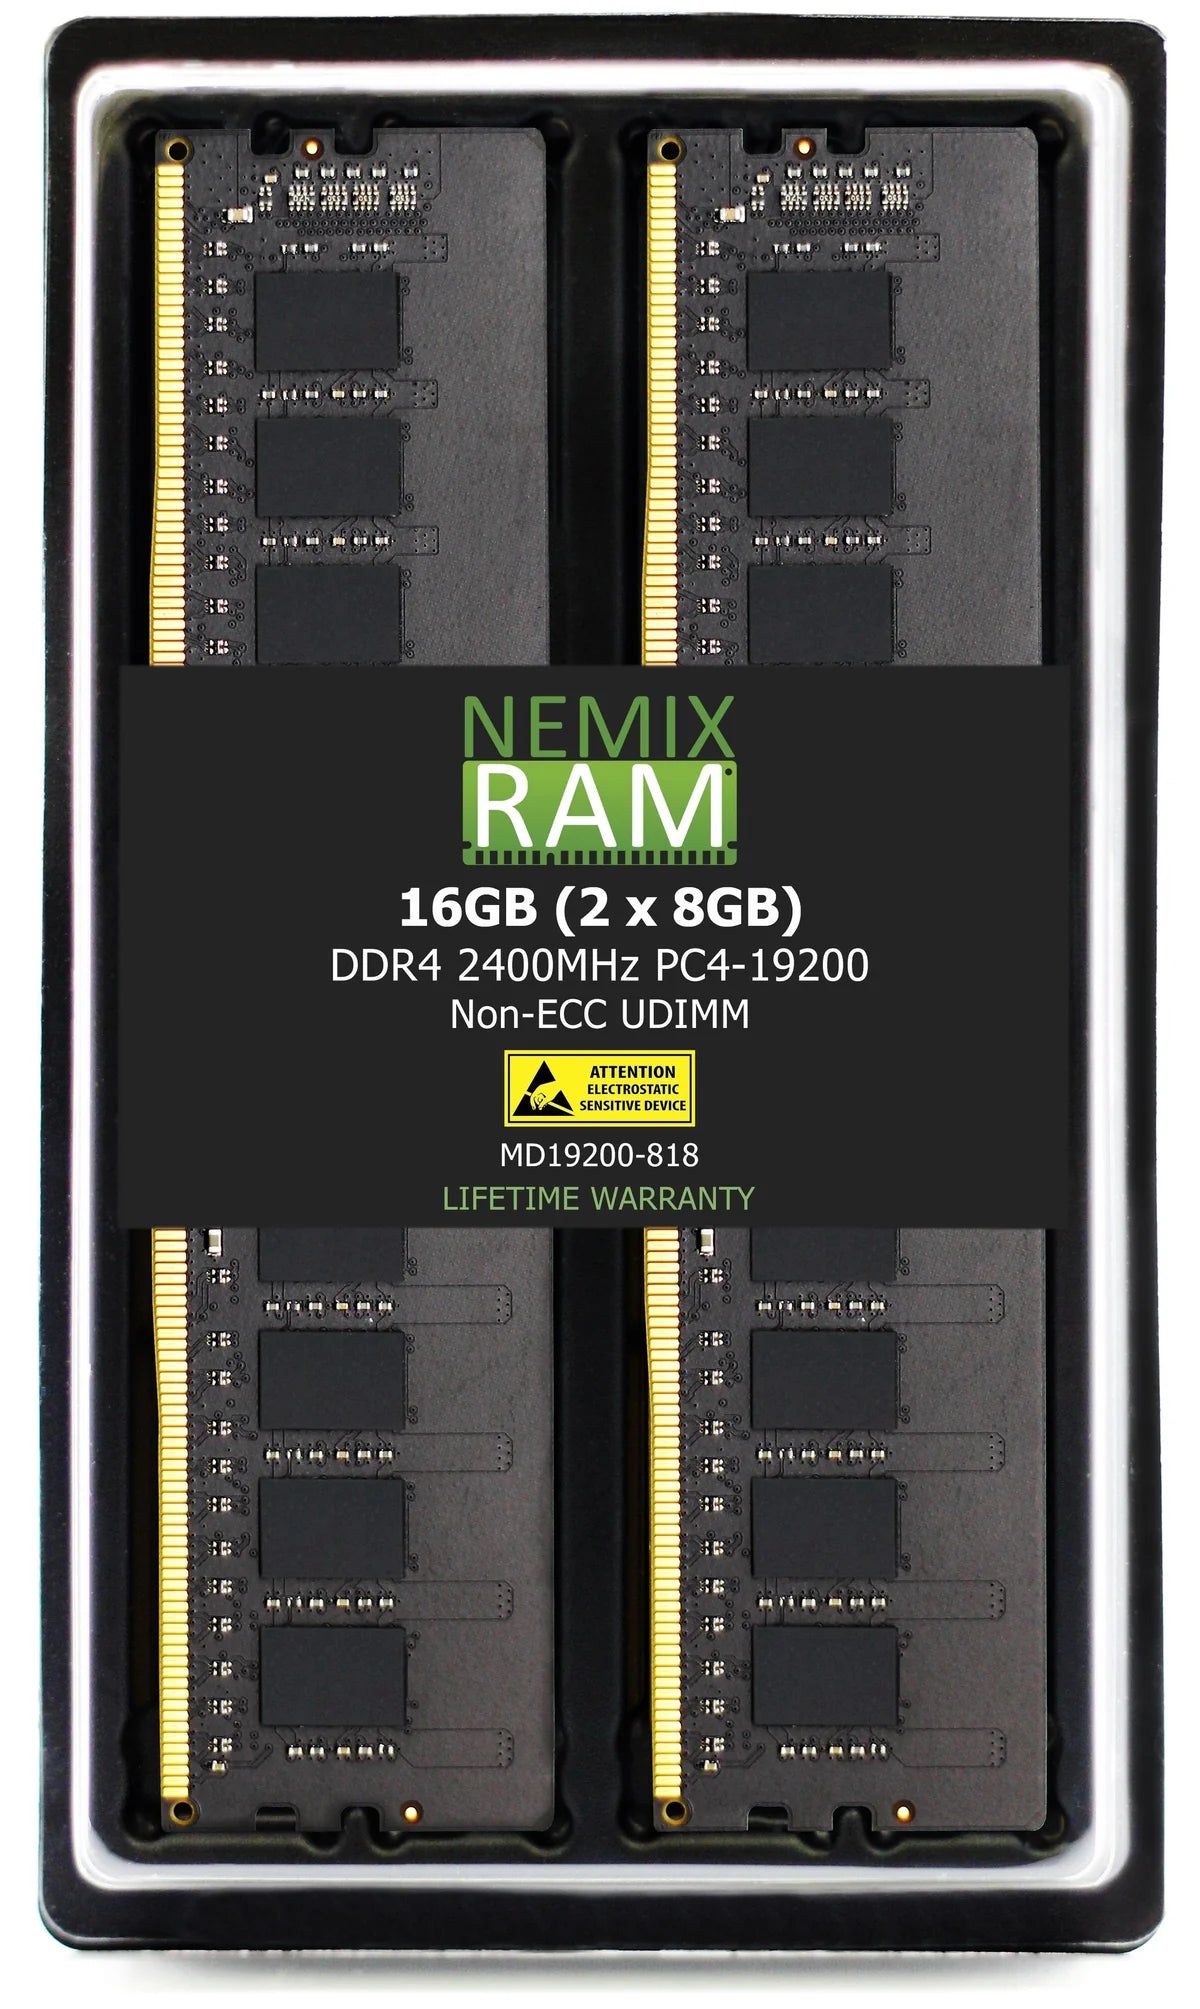 QNAP RAM-8GDR4A1-UD-2400 8GB DDR4 2400MHz PC4-19200 UDIMM 1Rx8 Compatible Memory